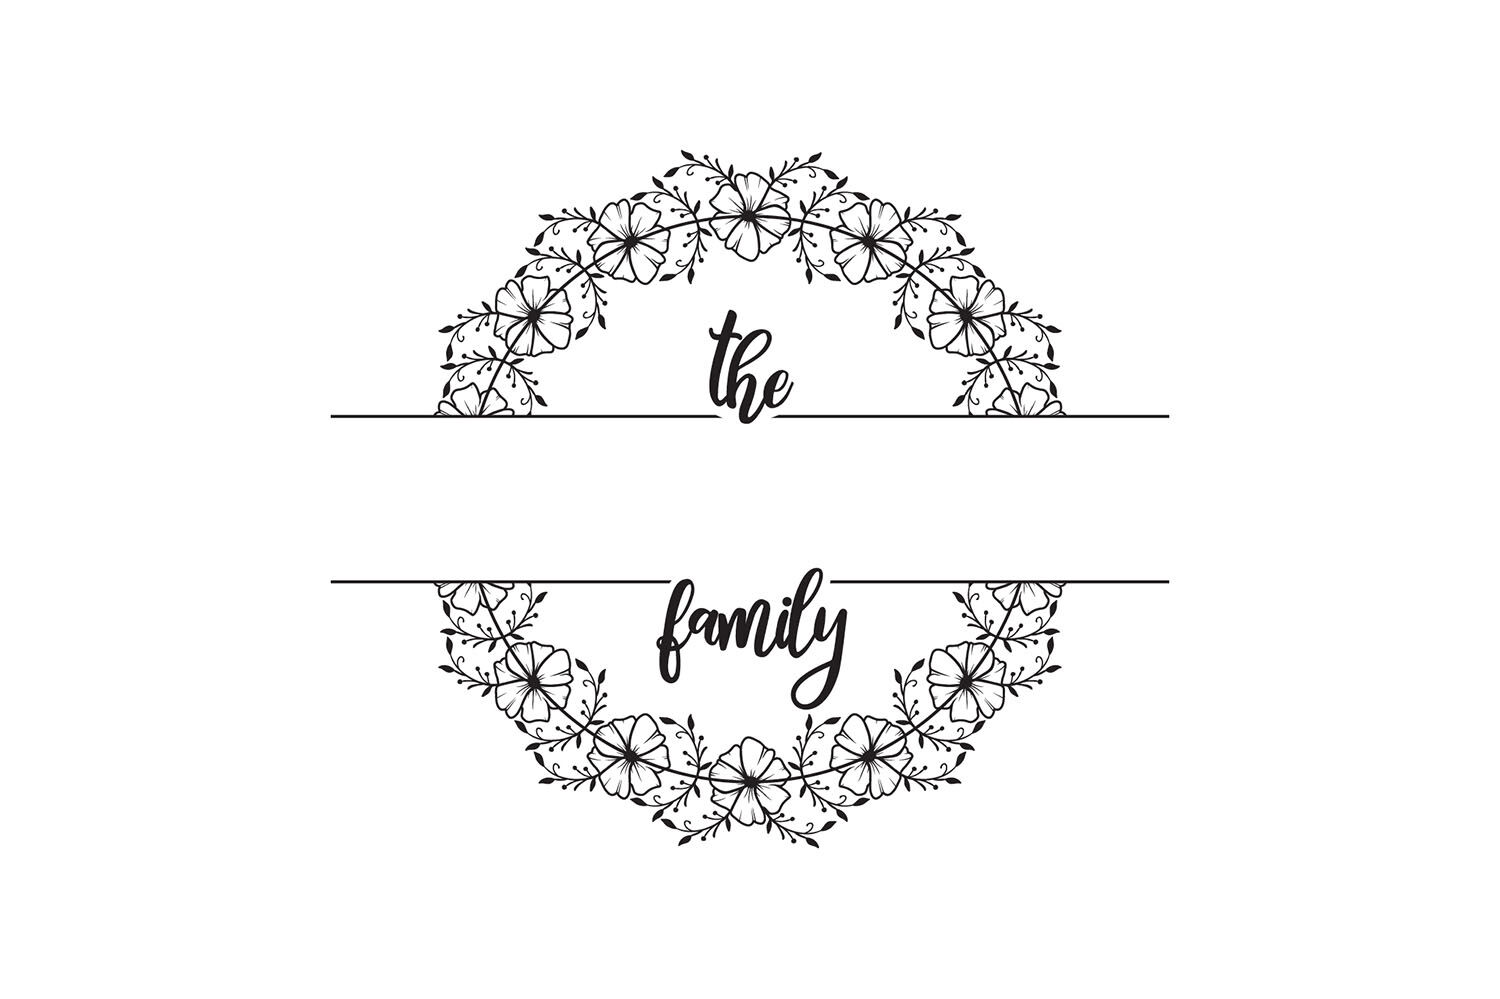 Download Clip Art Family Svg Farmhouse Style Svg Vinyl Cut Files Home Svg Dxf Png Silhouette Wreath Svg Cricut Svg For Home Sign Art Collectibles